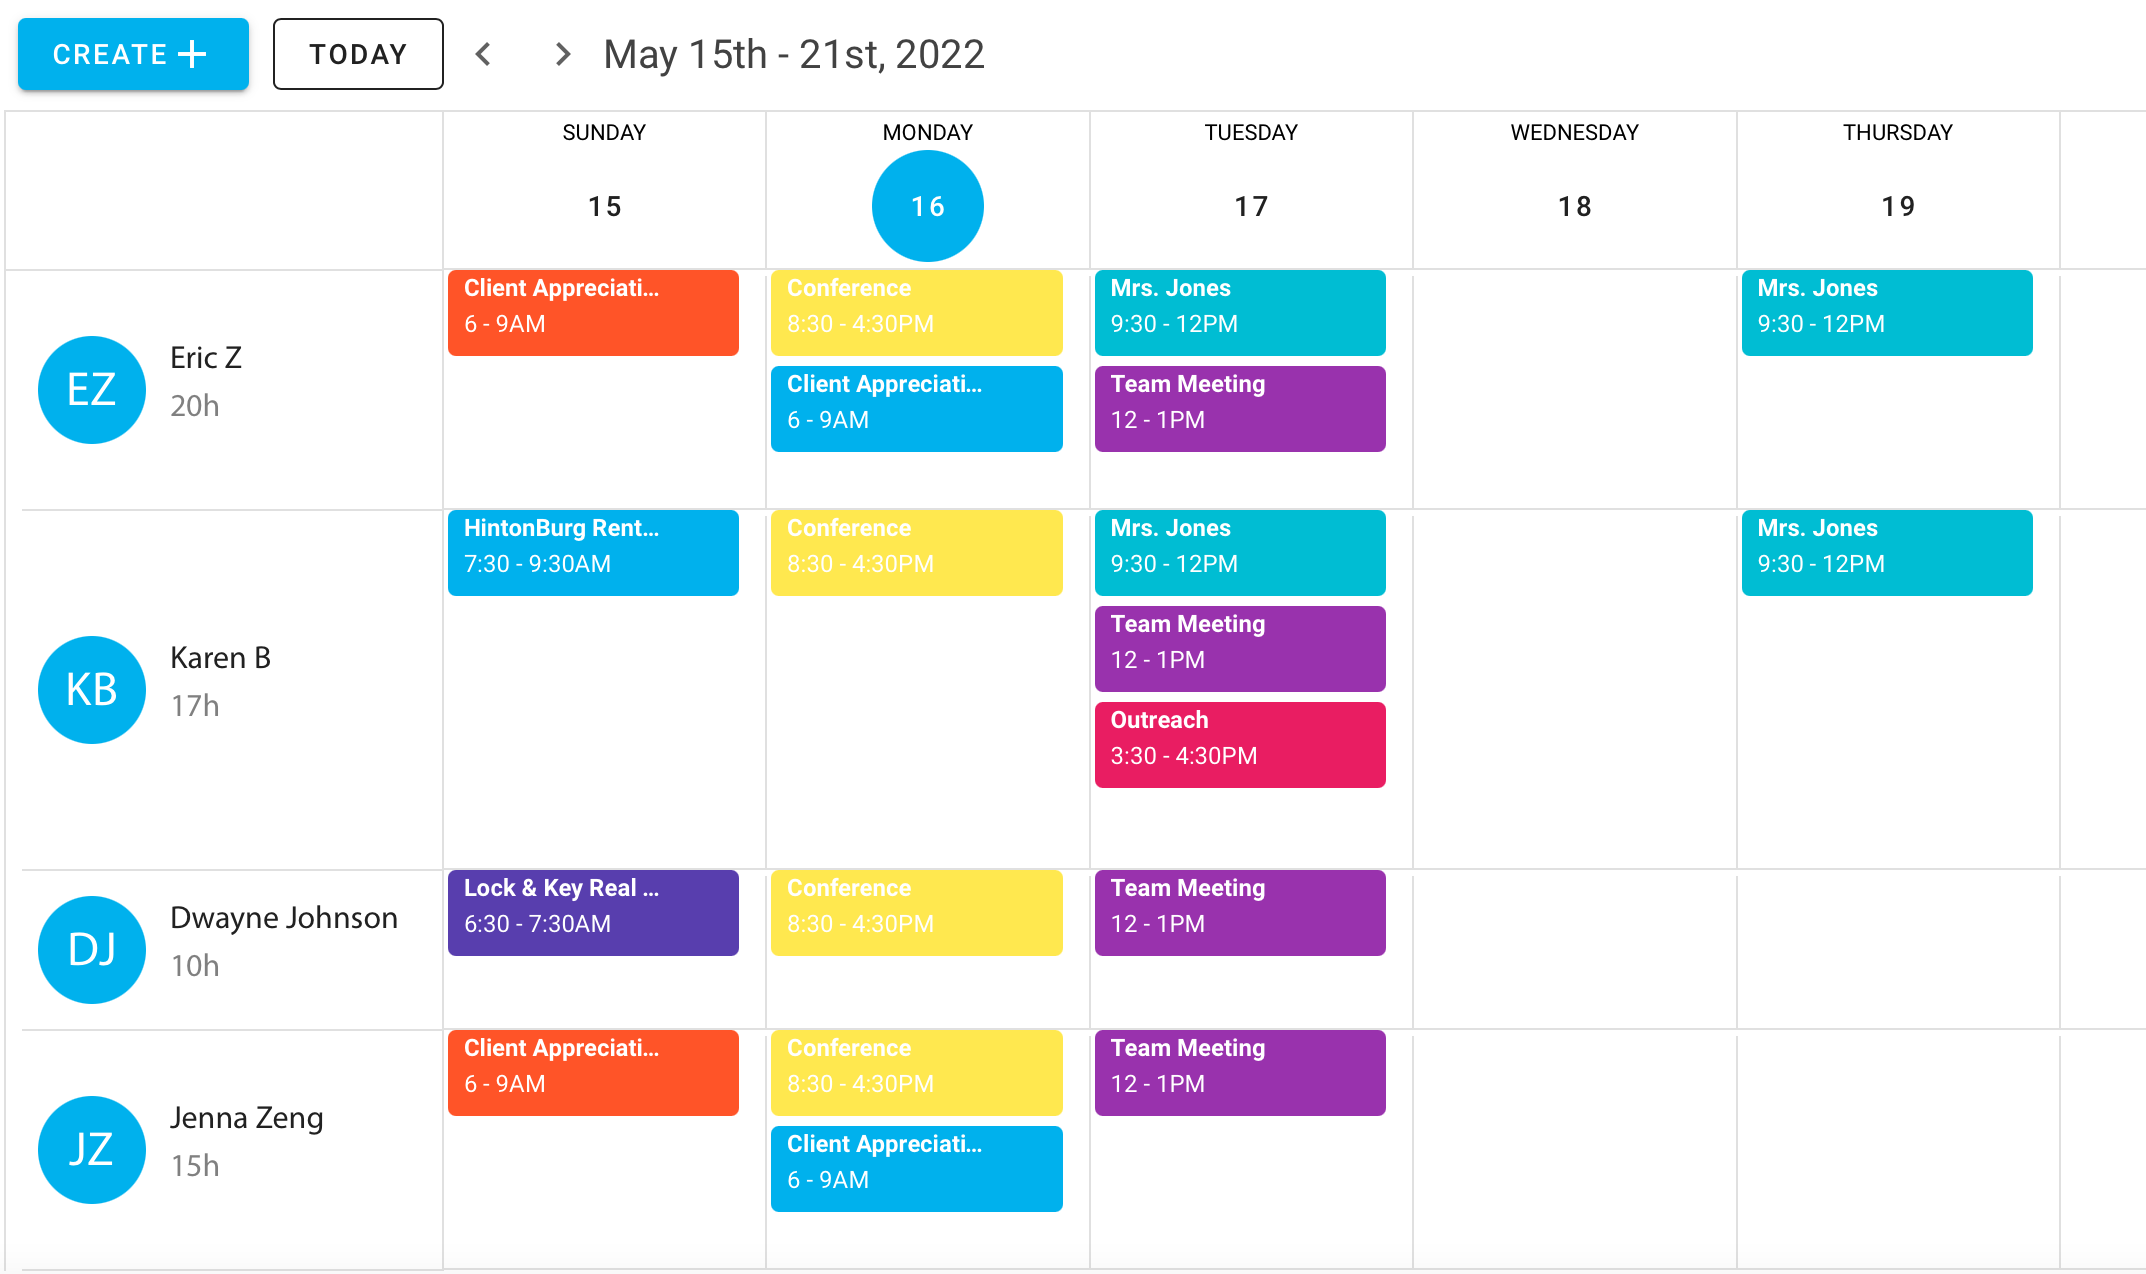 Second Timeline View - see each emplyess hours in this quick and efficient view